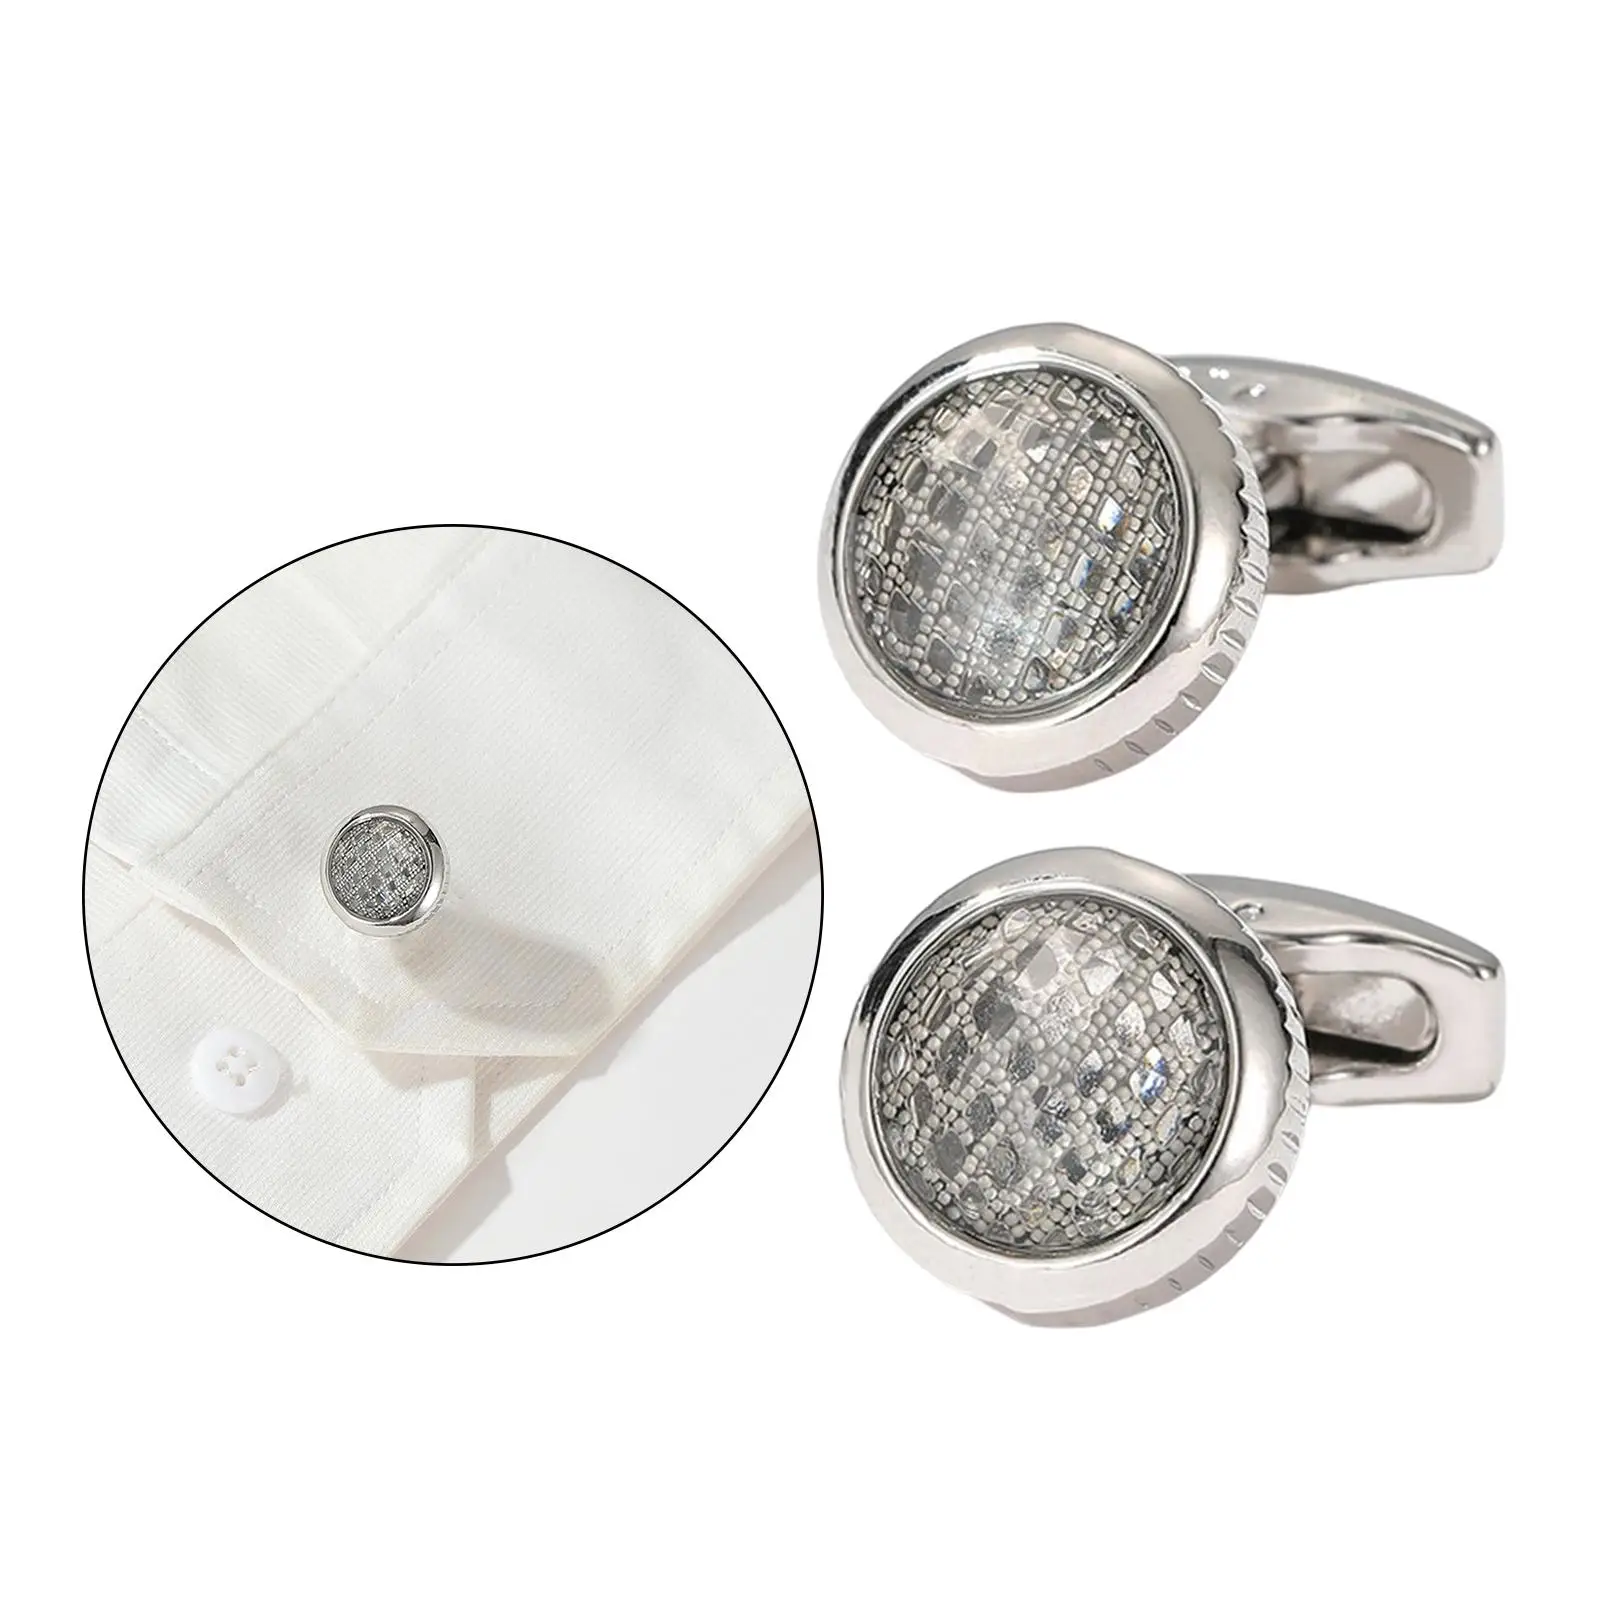 Round Men Cufflinks Photo Props Vintage Style Custom Clothing Costume Unique Cuff Links for Wedding Business Dad